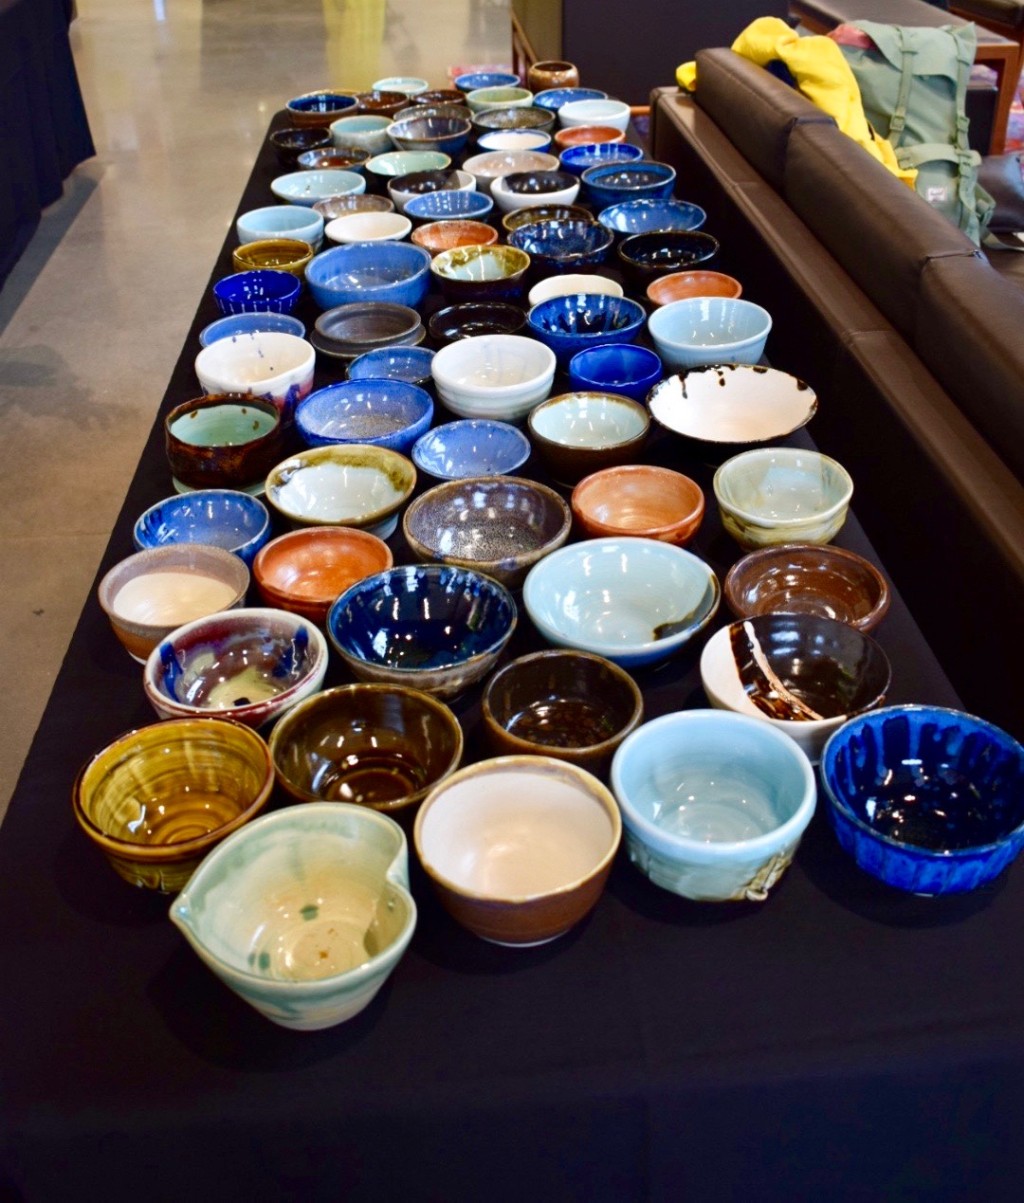 Handcrafted bowls made by UNE ceramics students